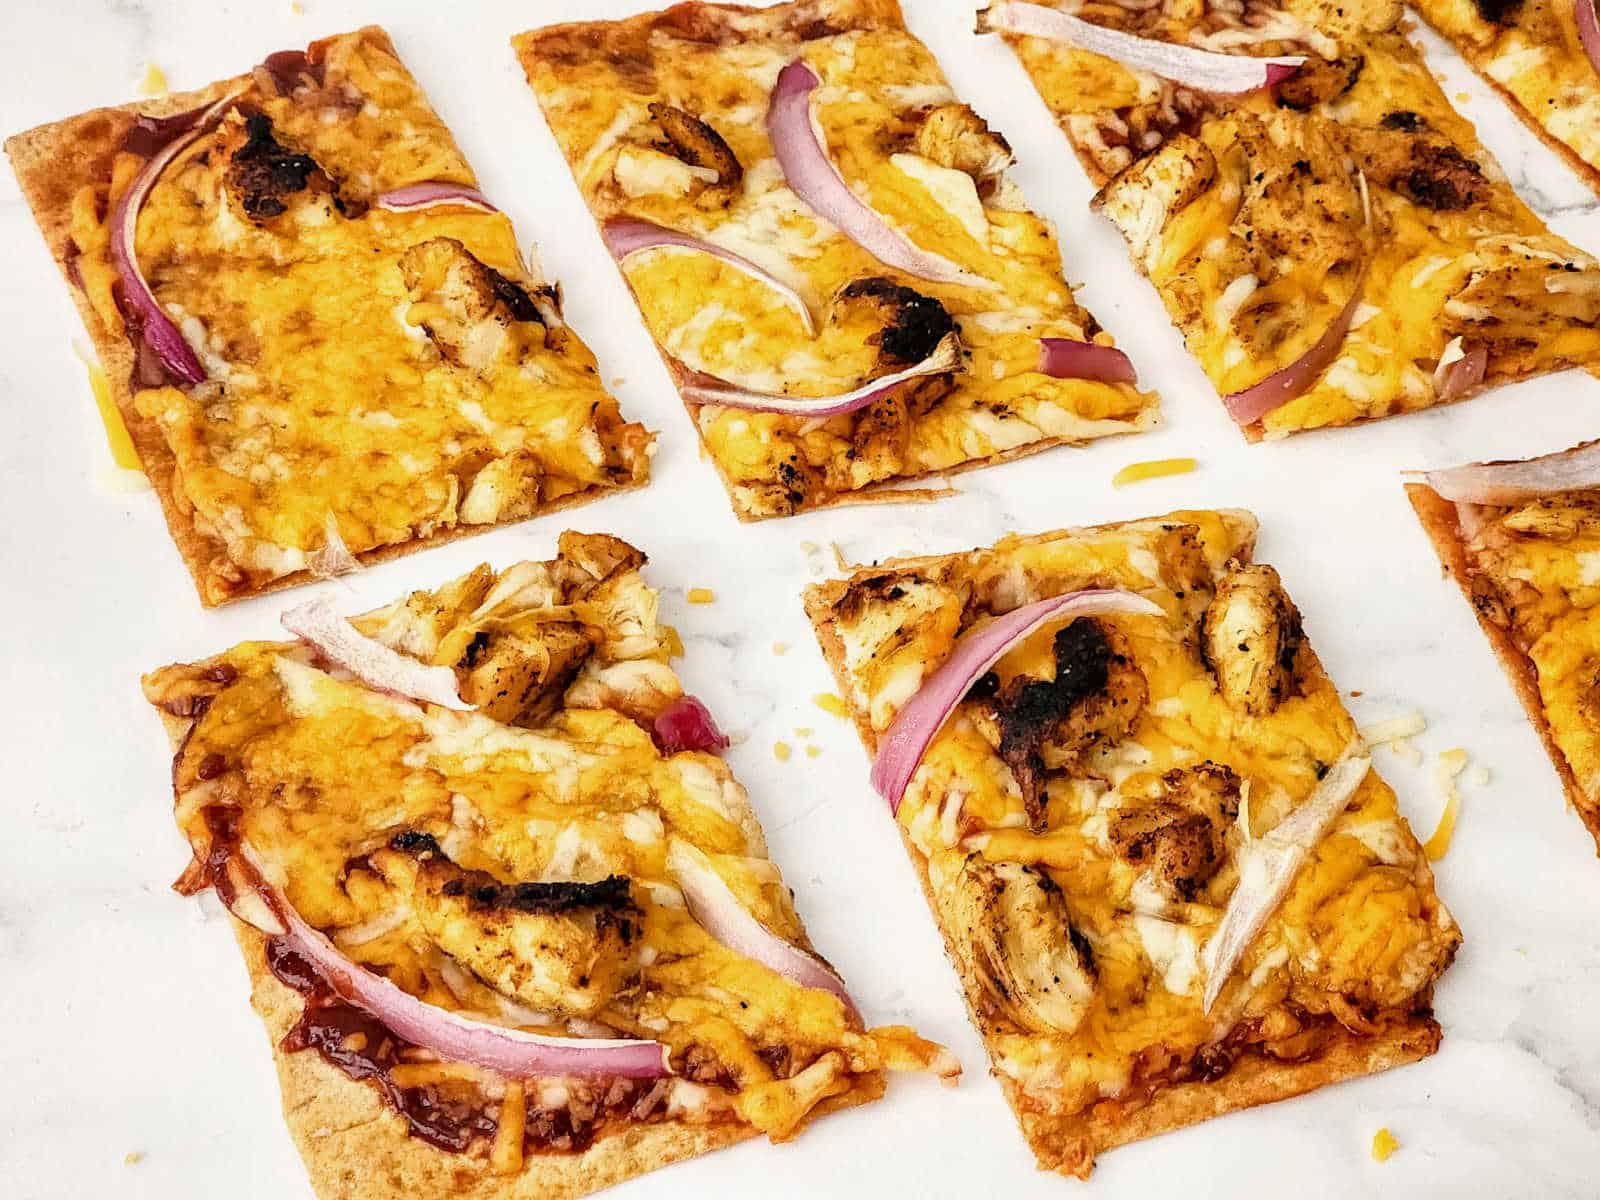 Grilled chicken flatbread pizzas on a marble countertop.